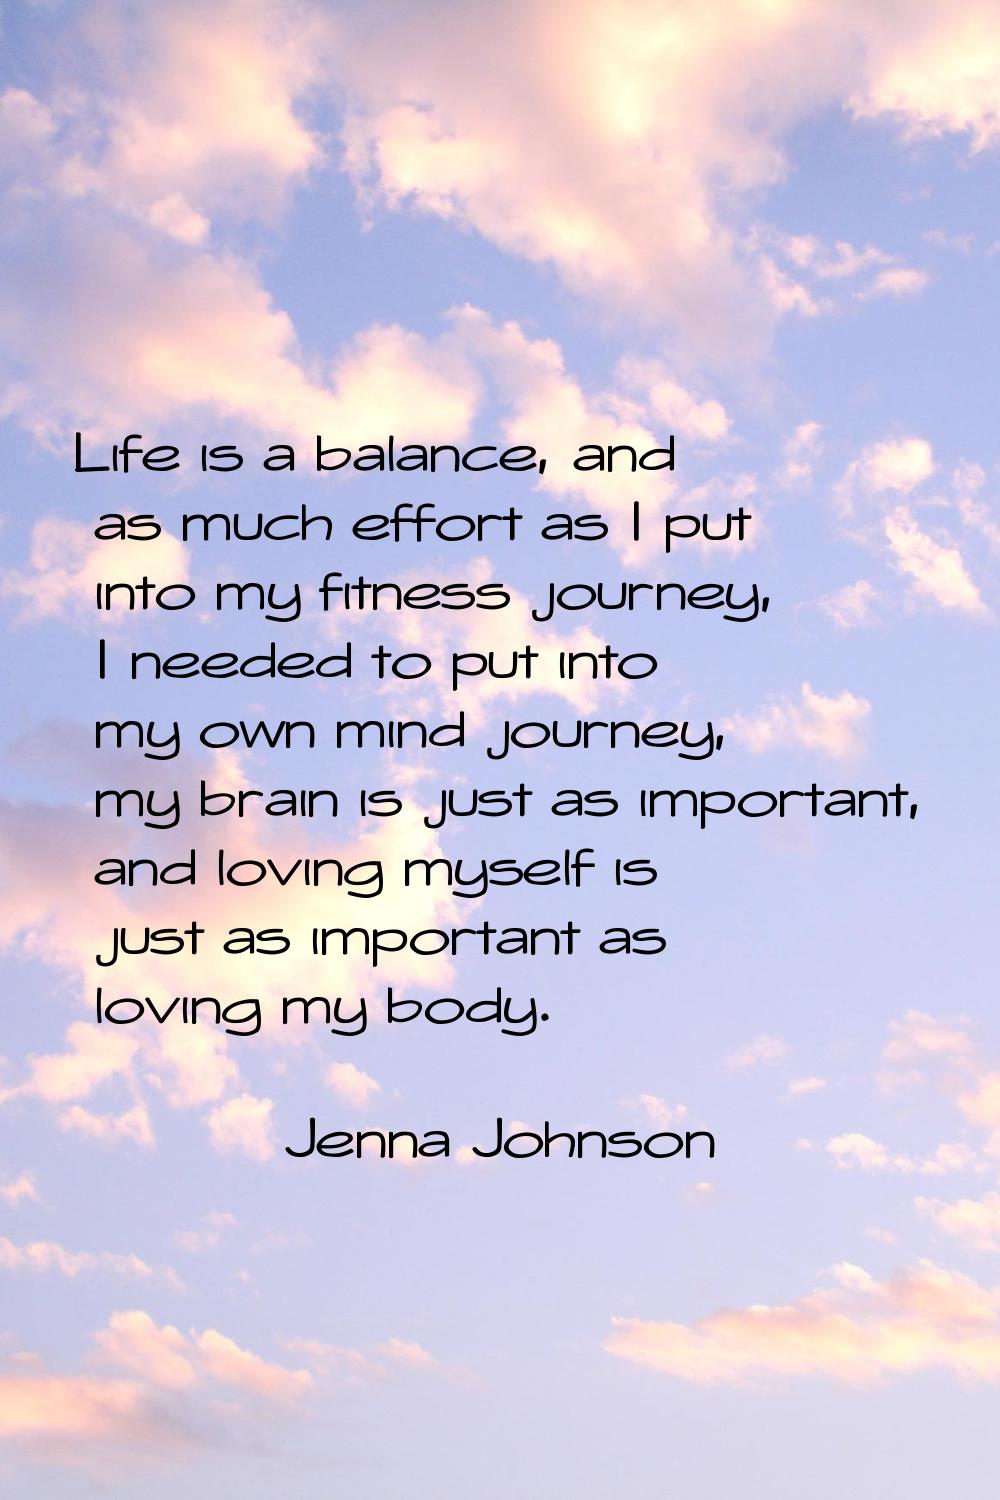 Life is a balance, and as much effort as I put into my fitness journey, I needed to put into my own